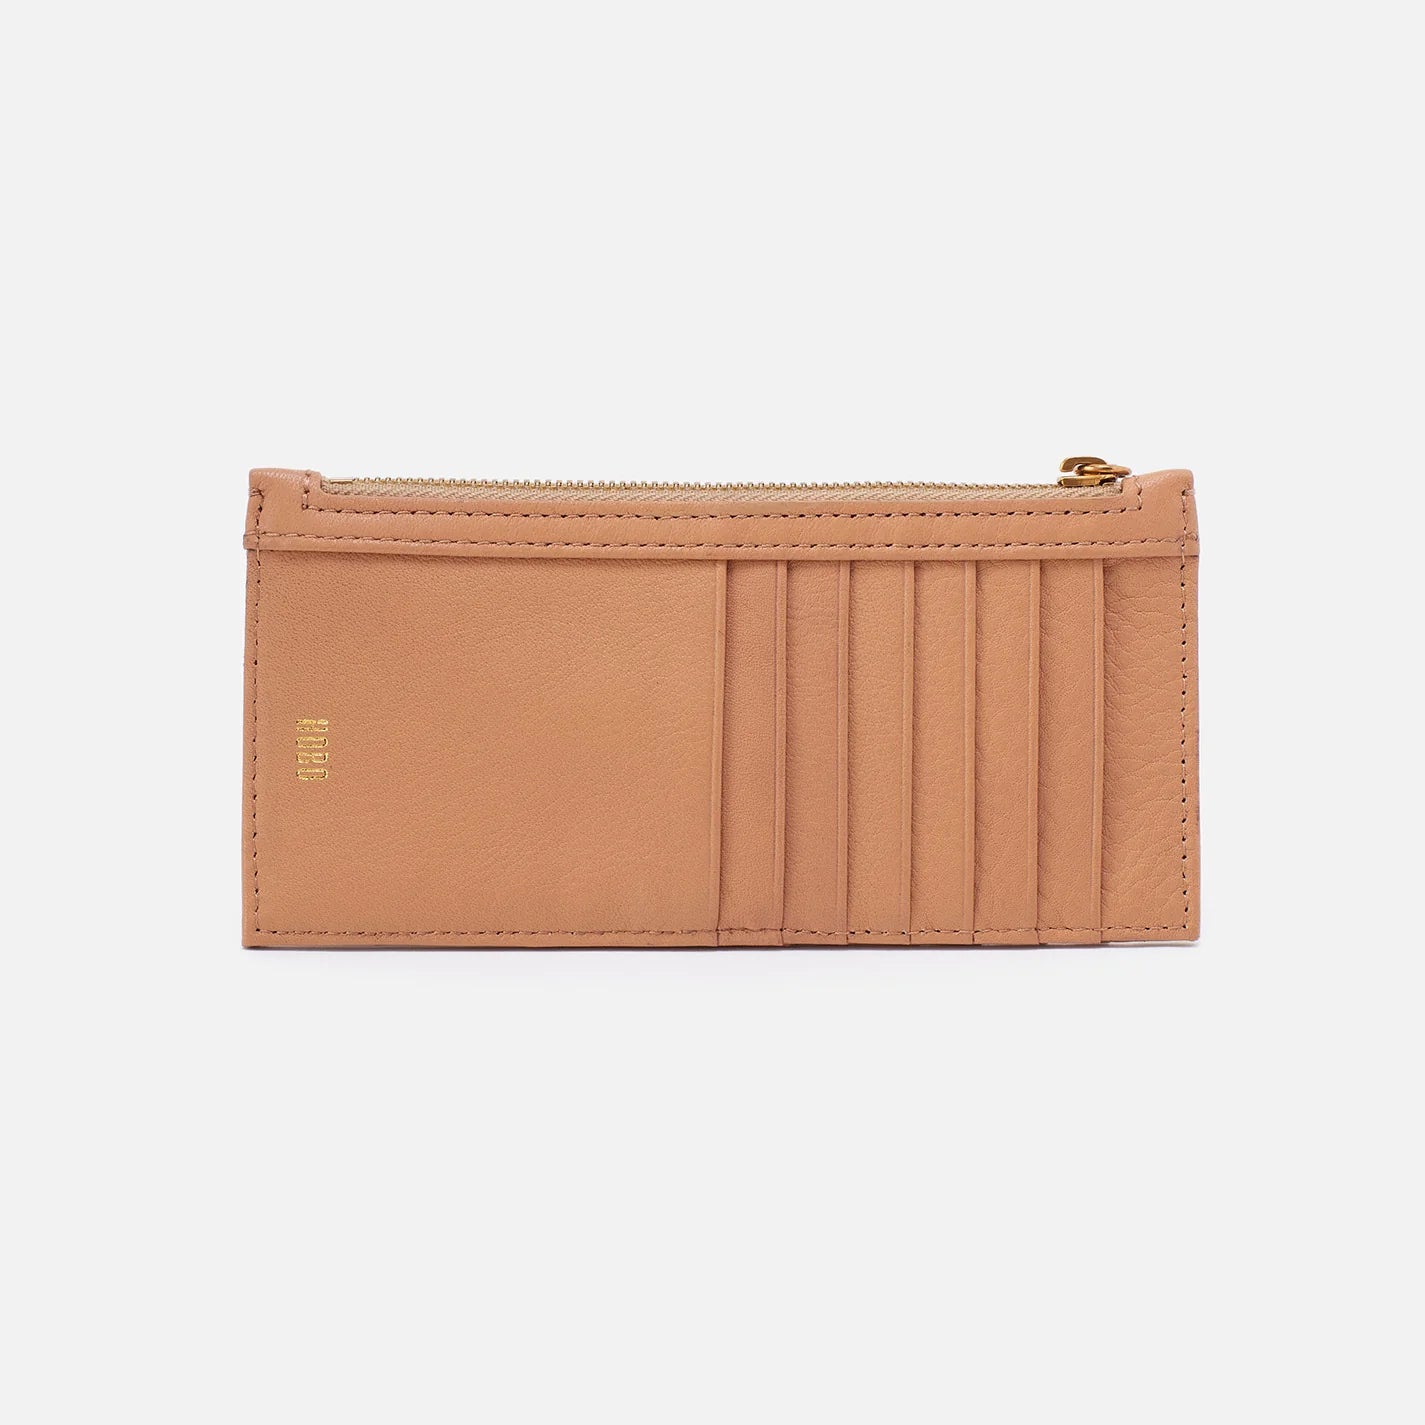 Carte Sandstorm by HOBO. Dimensions 6.5" W X 3" H X 0.5" D, features sandlewood lining exterior gusset: zip pocket, exterior front: 5 credit card slots & ID window; exterior Back: 6 credit card slots Old English Brass Hardware. Shop at The Painted Cottage in Edgewater, MD